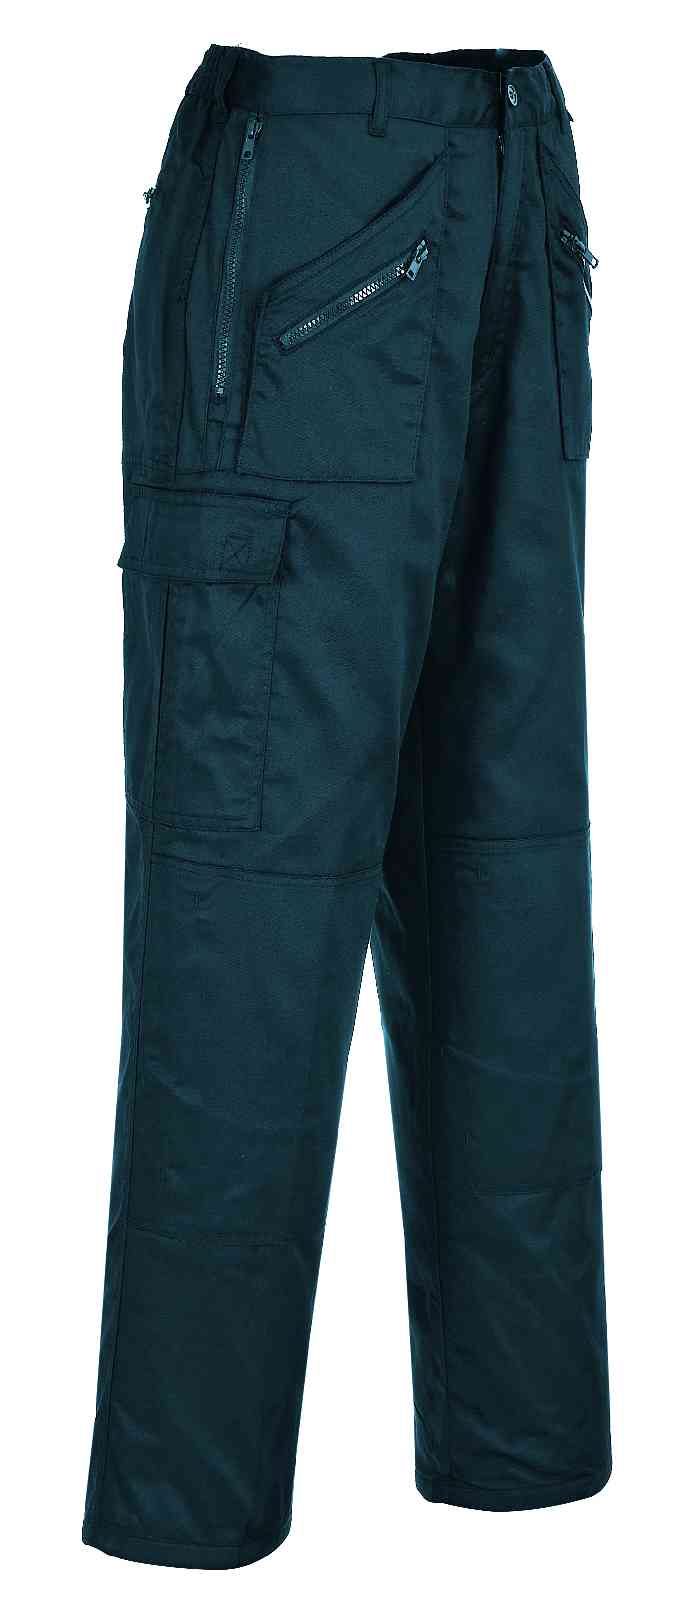 Portwest C387 Knee-pad Pockets Lined Men Action Trousers